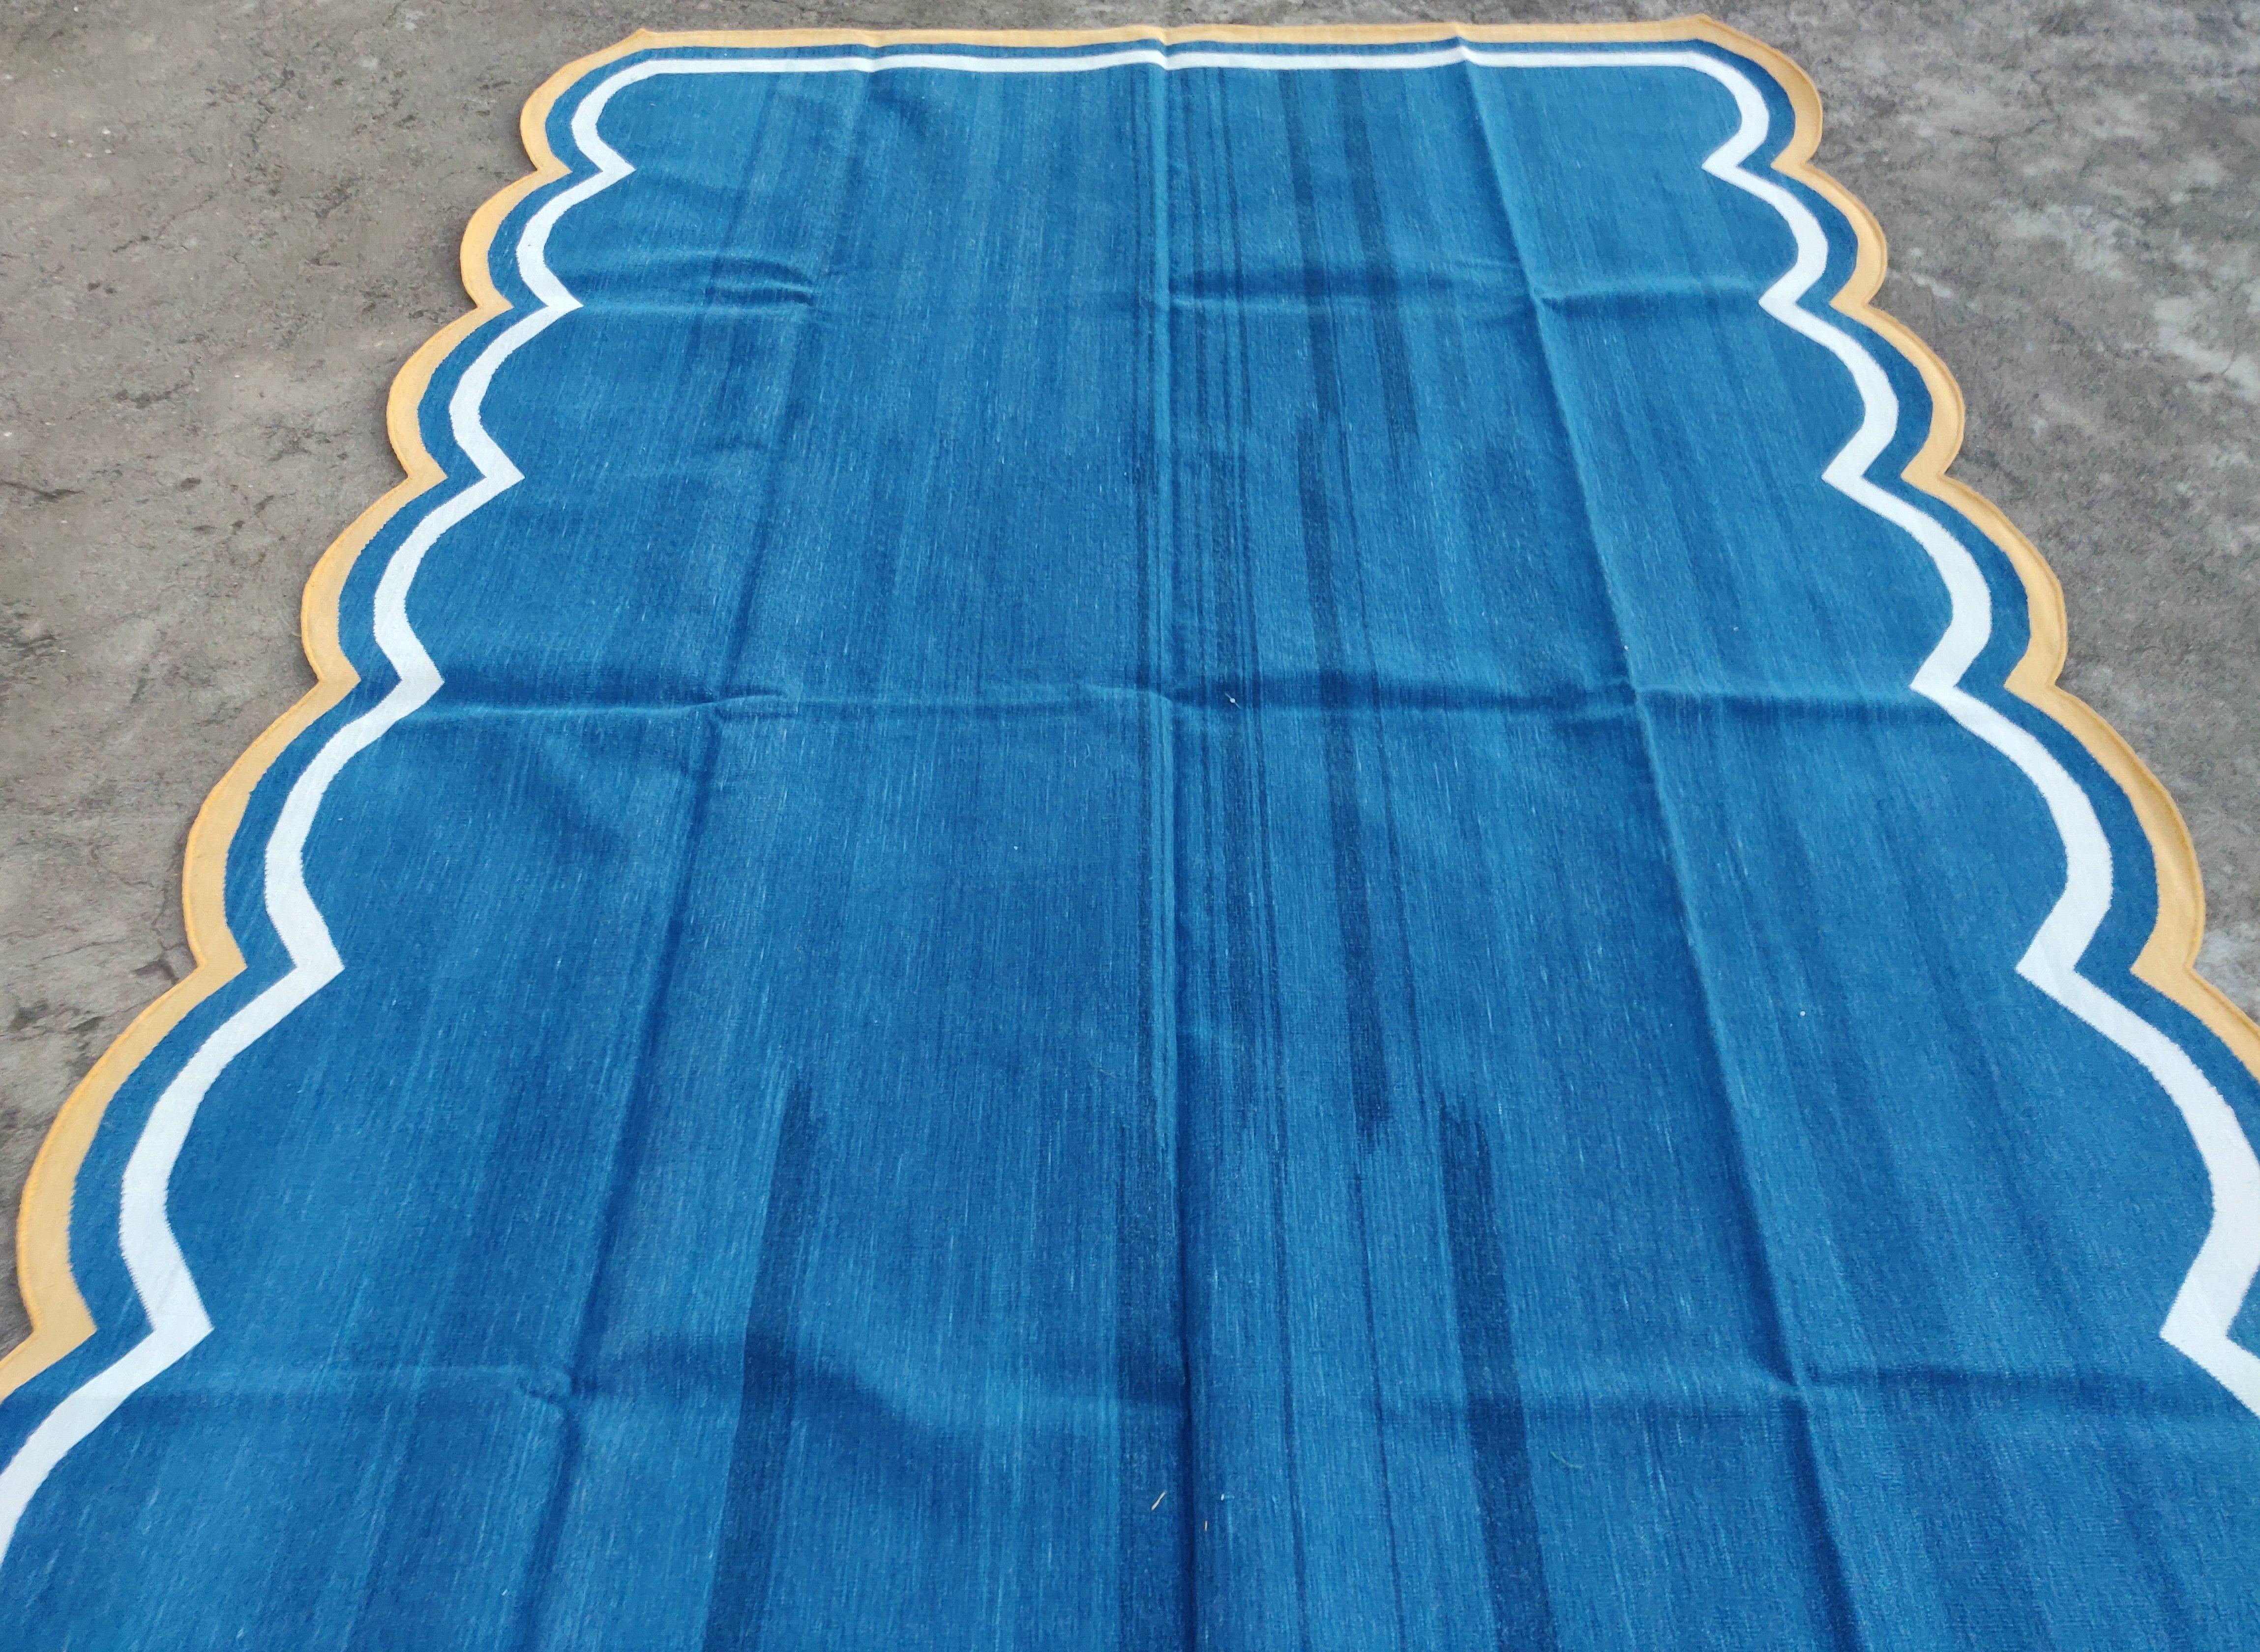 Handmade Cotton Area Flat Weave Rug, 8x10 Blue And Yellow Scallop Kilim Dhurrie In New Condition For Sale In Jaipur, IN